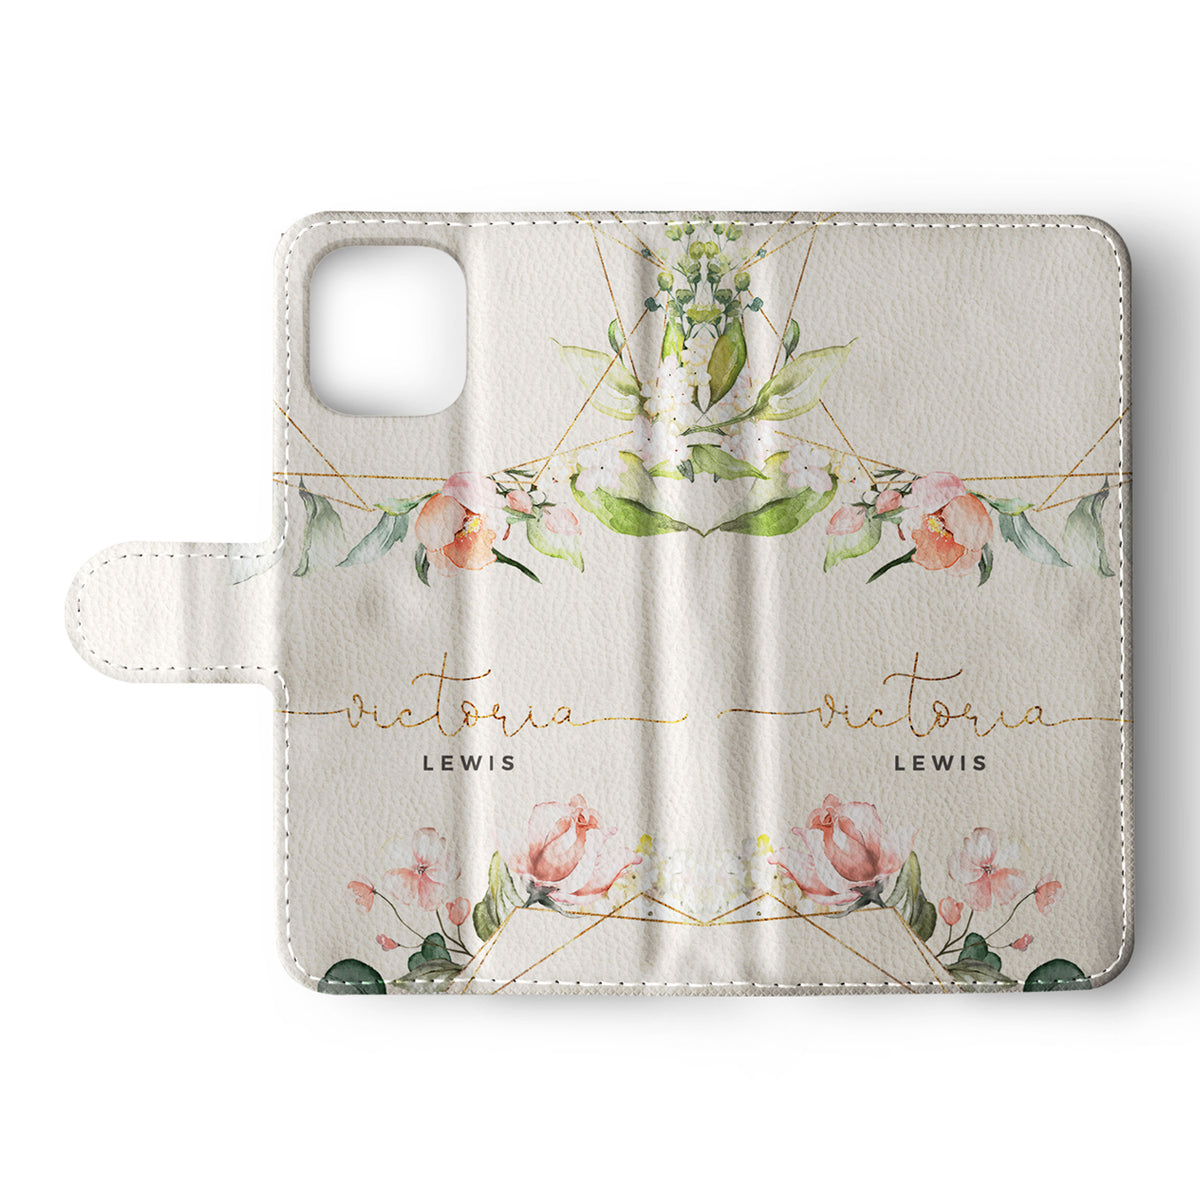 Personalised Wallet Flip Phone Case Custom Name Floral Vintage Shabby Chic Blossom Branch